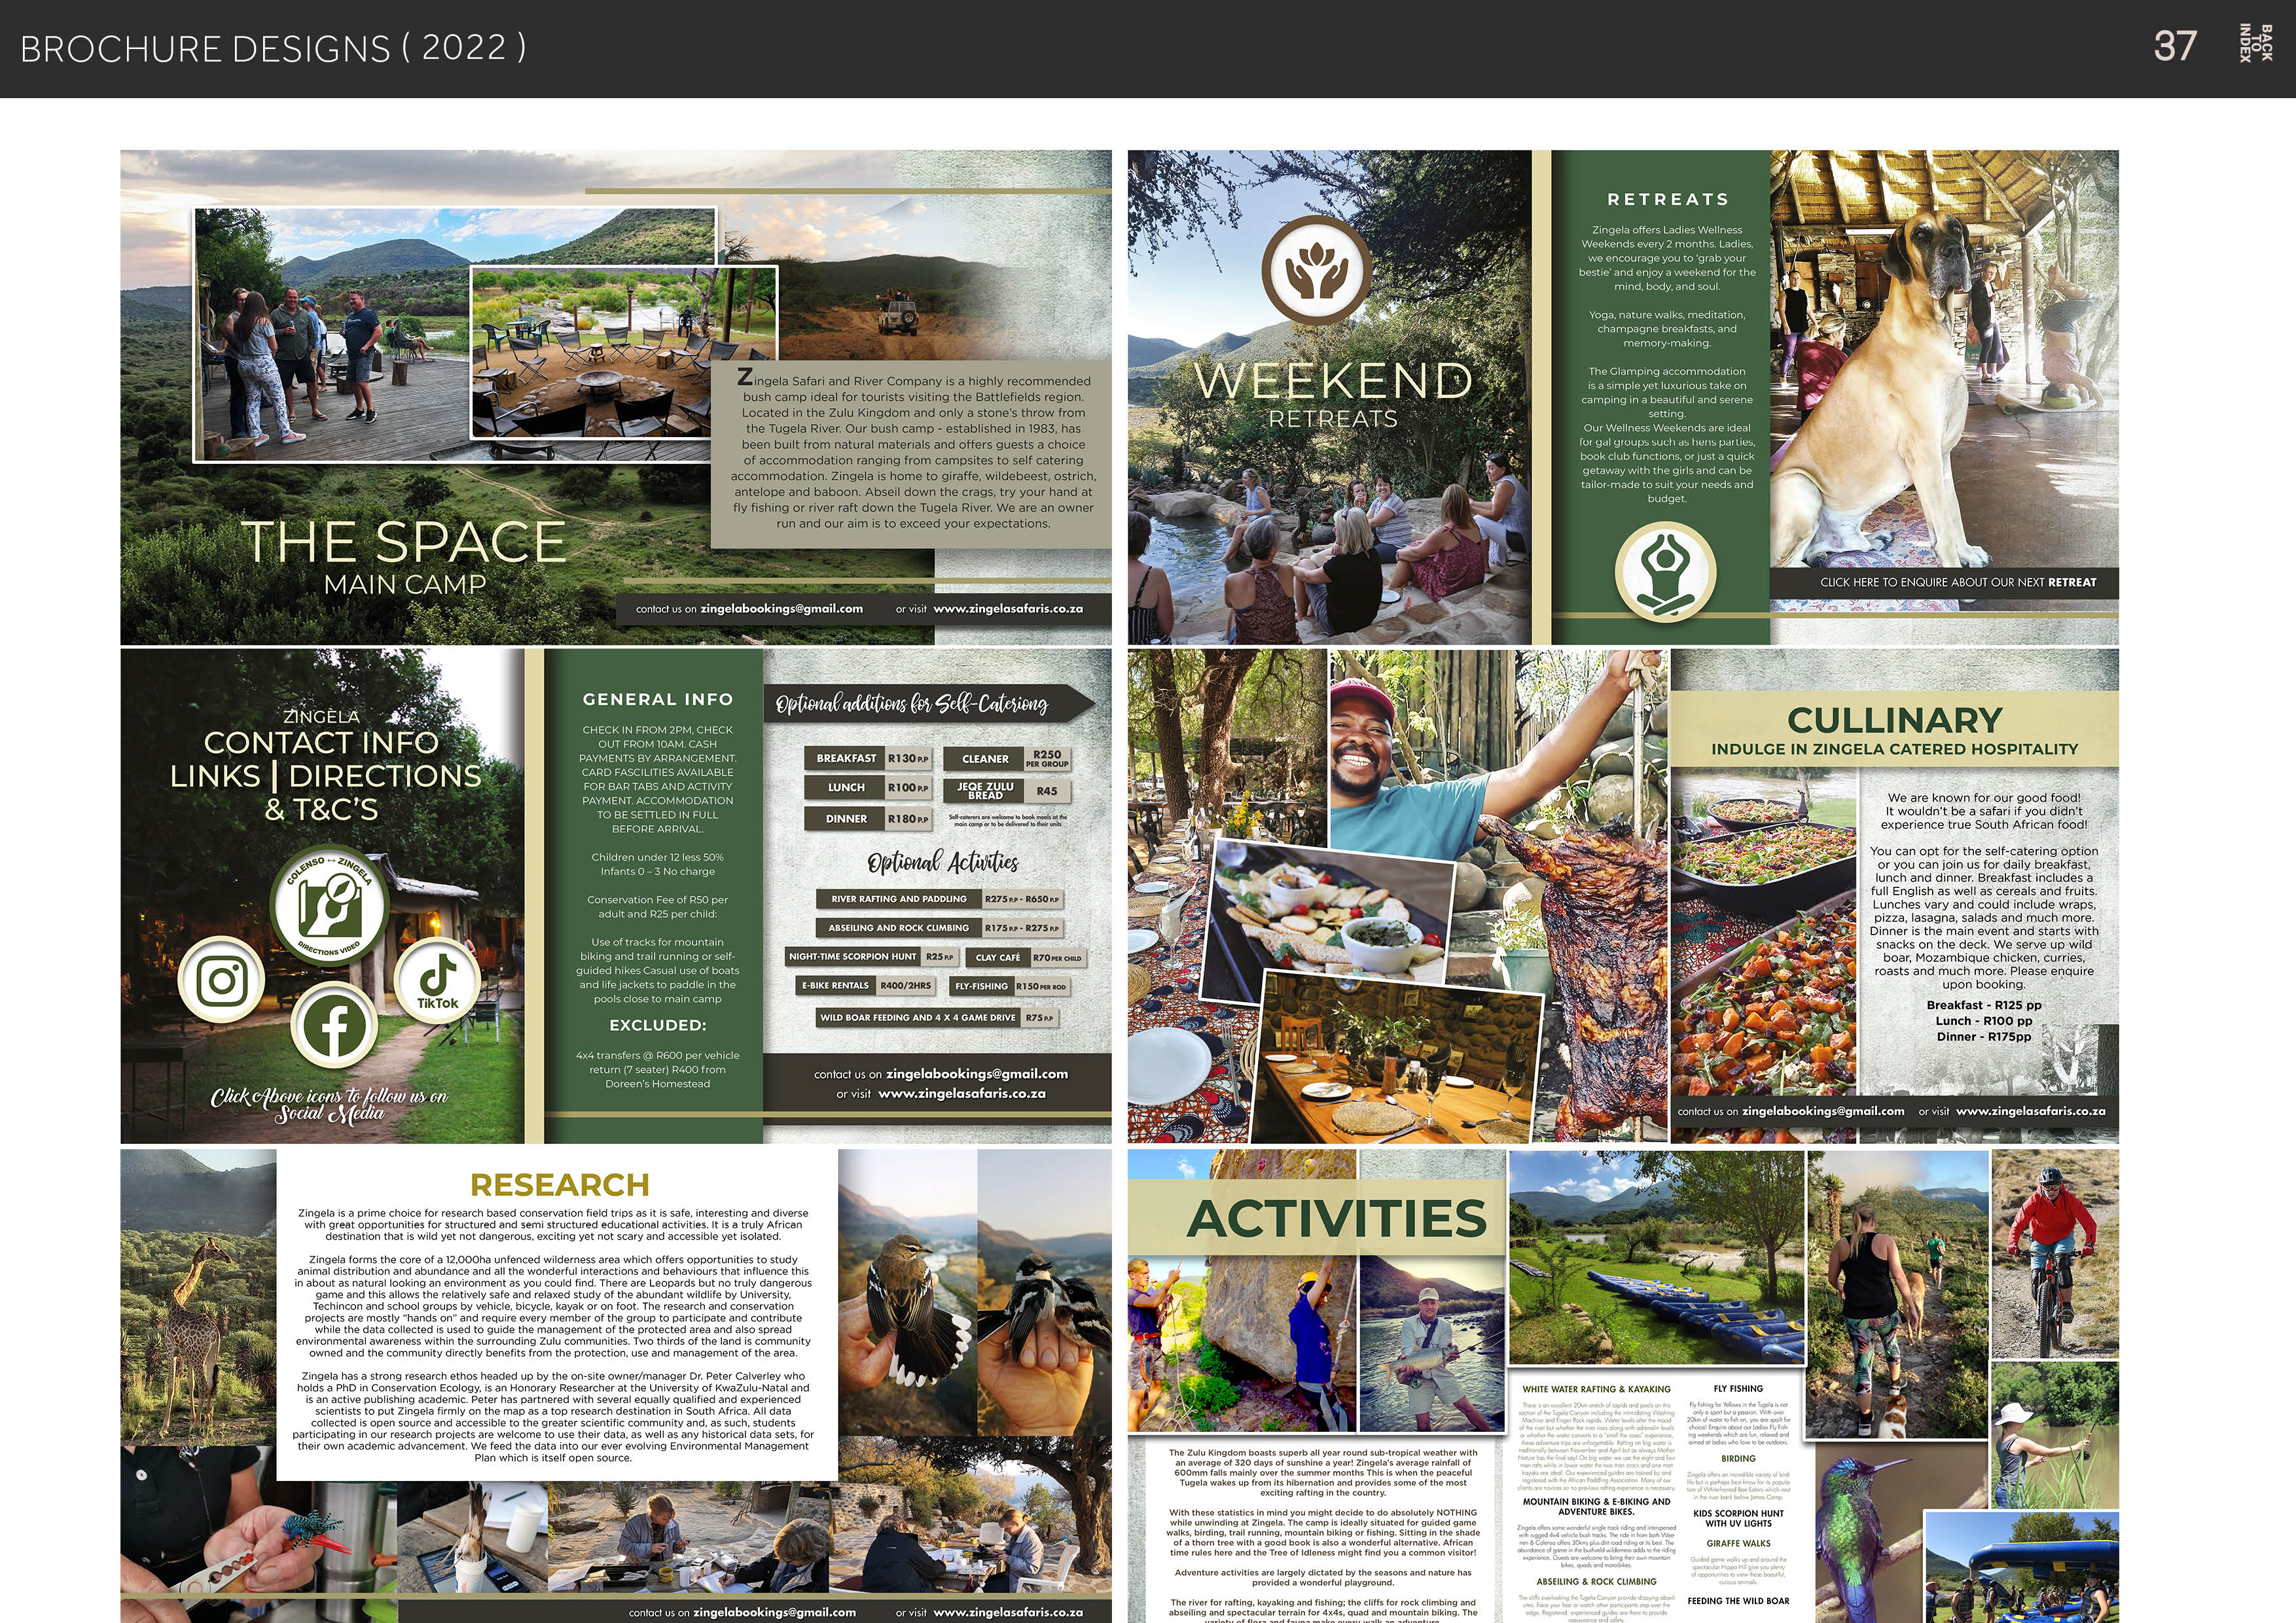 BROCHURE DESIGNS (2022)

RETREATS

Zingela offers Ladies Wellness
Weekends avery 2 months. Ladies,
We encourage you to ‘grab your
bestie’ anc enjoy a weekend for the

RR]

Ps
POT

     
   
   
   
   
   
   
   
   
     

oe
Tea!

Zingela Safari and River Company is a highly recommended e yet luxurious take on

bush camp Iceal for tourists visiting the Battlefields region “fuk : 3 in a beautiful and serena
Located in the Zulu Kingdom and only a stone's throw from a TR NES ¥ ’ EZLIGE)

the Tugela River. Qur bush camp - established in 1983, has 5 2 3 7 CE COE CR LT]
been built trom natural materials and otters guests a choice : b= . PIETER

of accommodation ranging from campsites to self catering
accommodation. Zingela is home to giraffe, wildebeest, ostrich,
fn antelope and baboon. Abseil down the crags, try your hand at

9 fly fishing or river raft down the Tugela River. We are an owner

run and our aim is to exceed your expectations.
MAIN CAMP

xt us on zingelabookings@gmail.com or vist www.zingelasaforis.co.za

GENERAL INFO | a La 17 Se LC)

son] [EER 42.
| Sed
Rl ply) |
IE | EEE
EEN ERT
Ee EET os veo |
PPT LF er x a
Use of tracks for mountain PR Ere
pe CEE | ET vo

§ hikes Casual use of lo

Hr CTY wecoiaves | [ERE vrs0mee |

ERTS Tres

EXCLUDED: EEE «os

CULLINARY

INDULGE IN ZINGELA CATERED HOSPITALITY

SITES SEE

    
   
   
   
   
   
   
   
     

We are known for our good food!
It wouldn't be a safari if you didn't
experience true South African food!

You can opt for the self-catering option
or you can join us for daily breakfast.
lunch and dinner. Breakfast includes a

full English as well as cereals and fruits

Lunches vary and could include wraps,
pizza, lasagna, salads and much more

Dinner is the main event and starts with
snacks on the deck. We serve up wild

boar, Mozambigue chicken, curries,
roasts and much more. Please enquire
upon booking

Breakfast - R125 pp

Lunch - R100 pp
Dinner - R175pp

 

   

     
  
  

contact us on zingelabookings@gmail.com

Click eifhove V0 ya 2 or visit. www.zingelasafaris.co.za > .
BRIA Cid KES § : : S {a : : zingelabookings@gmail.com or visit www.zingelasafaris.co.za

AG

     
  
   
     
     
     
   
     
   
 
 
  
  
  
   
 
 
 
  

ime choice for research based ¢

     
  

Zingela forms the core of a 12,000ha

animal distribution and abundance ard all the wonderful interactions a

as natura ng an environment as you could ng T
game and the relatively safe and relaxed
Tec! ehicie, bicycle. kayak

projects are mostly

whe the dat

  

rs that influence this
s but no truly dangerous
iiiife by University

t. The research and conservation

> 10 partic pate and contribute

ted area and also spread

he land is community
use anc management of the area

 
   
  
  

 

  
       
 
  
 
  

 

 

   

  

owned and the community directly benefits from the protec:

  
  
     
   
   
   
   

    
    

Zingela has a strong rese:
holds a PhD in Conserva
1s an active publishing

scientists to put Zingela firm!

er/manager Dr Peter Calveriey
the Un versity of KwaZuu-Natal
h several ecually qualtiec and experienced
the map as a top research destination in South Africa. Al data
essibie 10 the greater scientific community and, as such. stud
search projects are welcome to use their data. as well as any histoncal
dvancement We feed the data nto our ever evolving Environmental M
Plan which is itself open source

     

 

WHITE WATER RAFTING & KAYAKING FLY FISHING

  

    
   
 

       
 

   
 
     
   
 
   
     
   

a year! Zingela's avi
o summer months This is when the peacelu
10me of the most

  
 
     
   
       
   
   
 

MOUNTAIN BIKING & £-8IKING AND
ADVENTURE BIKES KIDS SCORPION HUNT
WITH UV LIGHTS

 

    
 

tree with a 900d book 1s also a wondertu’
time rules here and the Tree of idleness Might find you a common vi

GRAFFE WALKS

Adventure act ely cictated by the seasons a

a wonderful playground | ABSEIING & ROCK C

        

FEEDING THE WILD BOAR